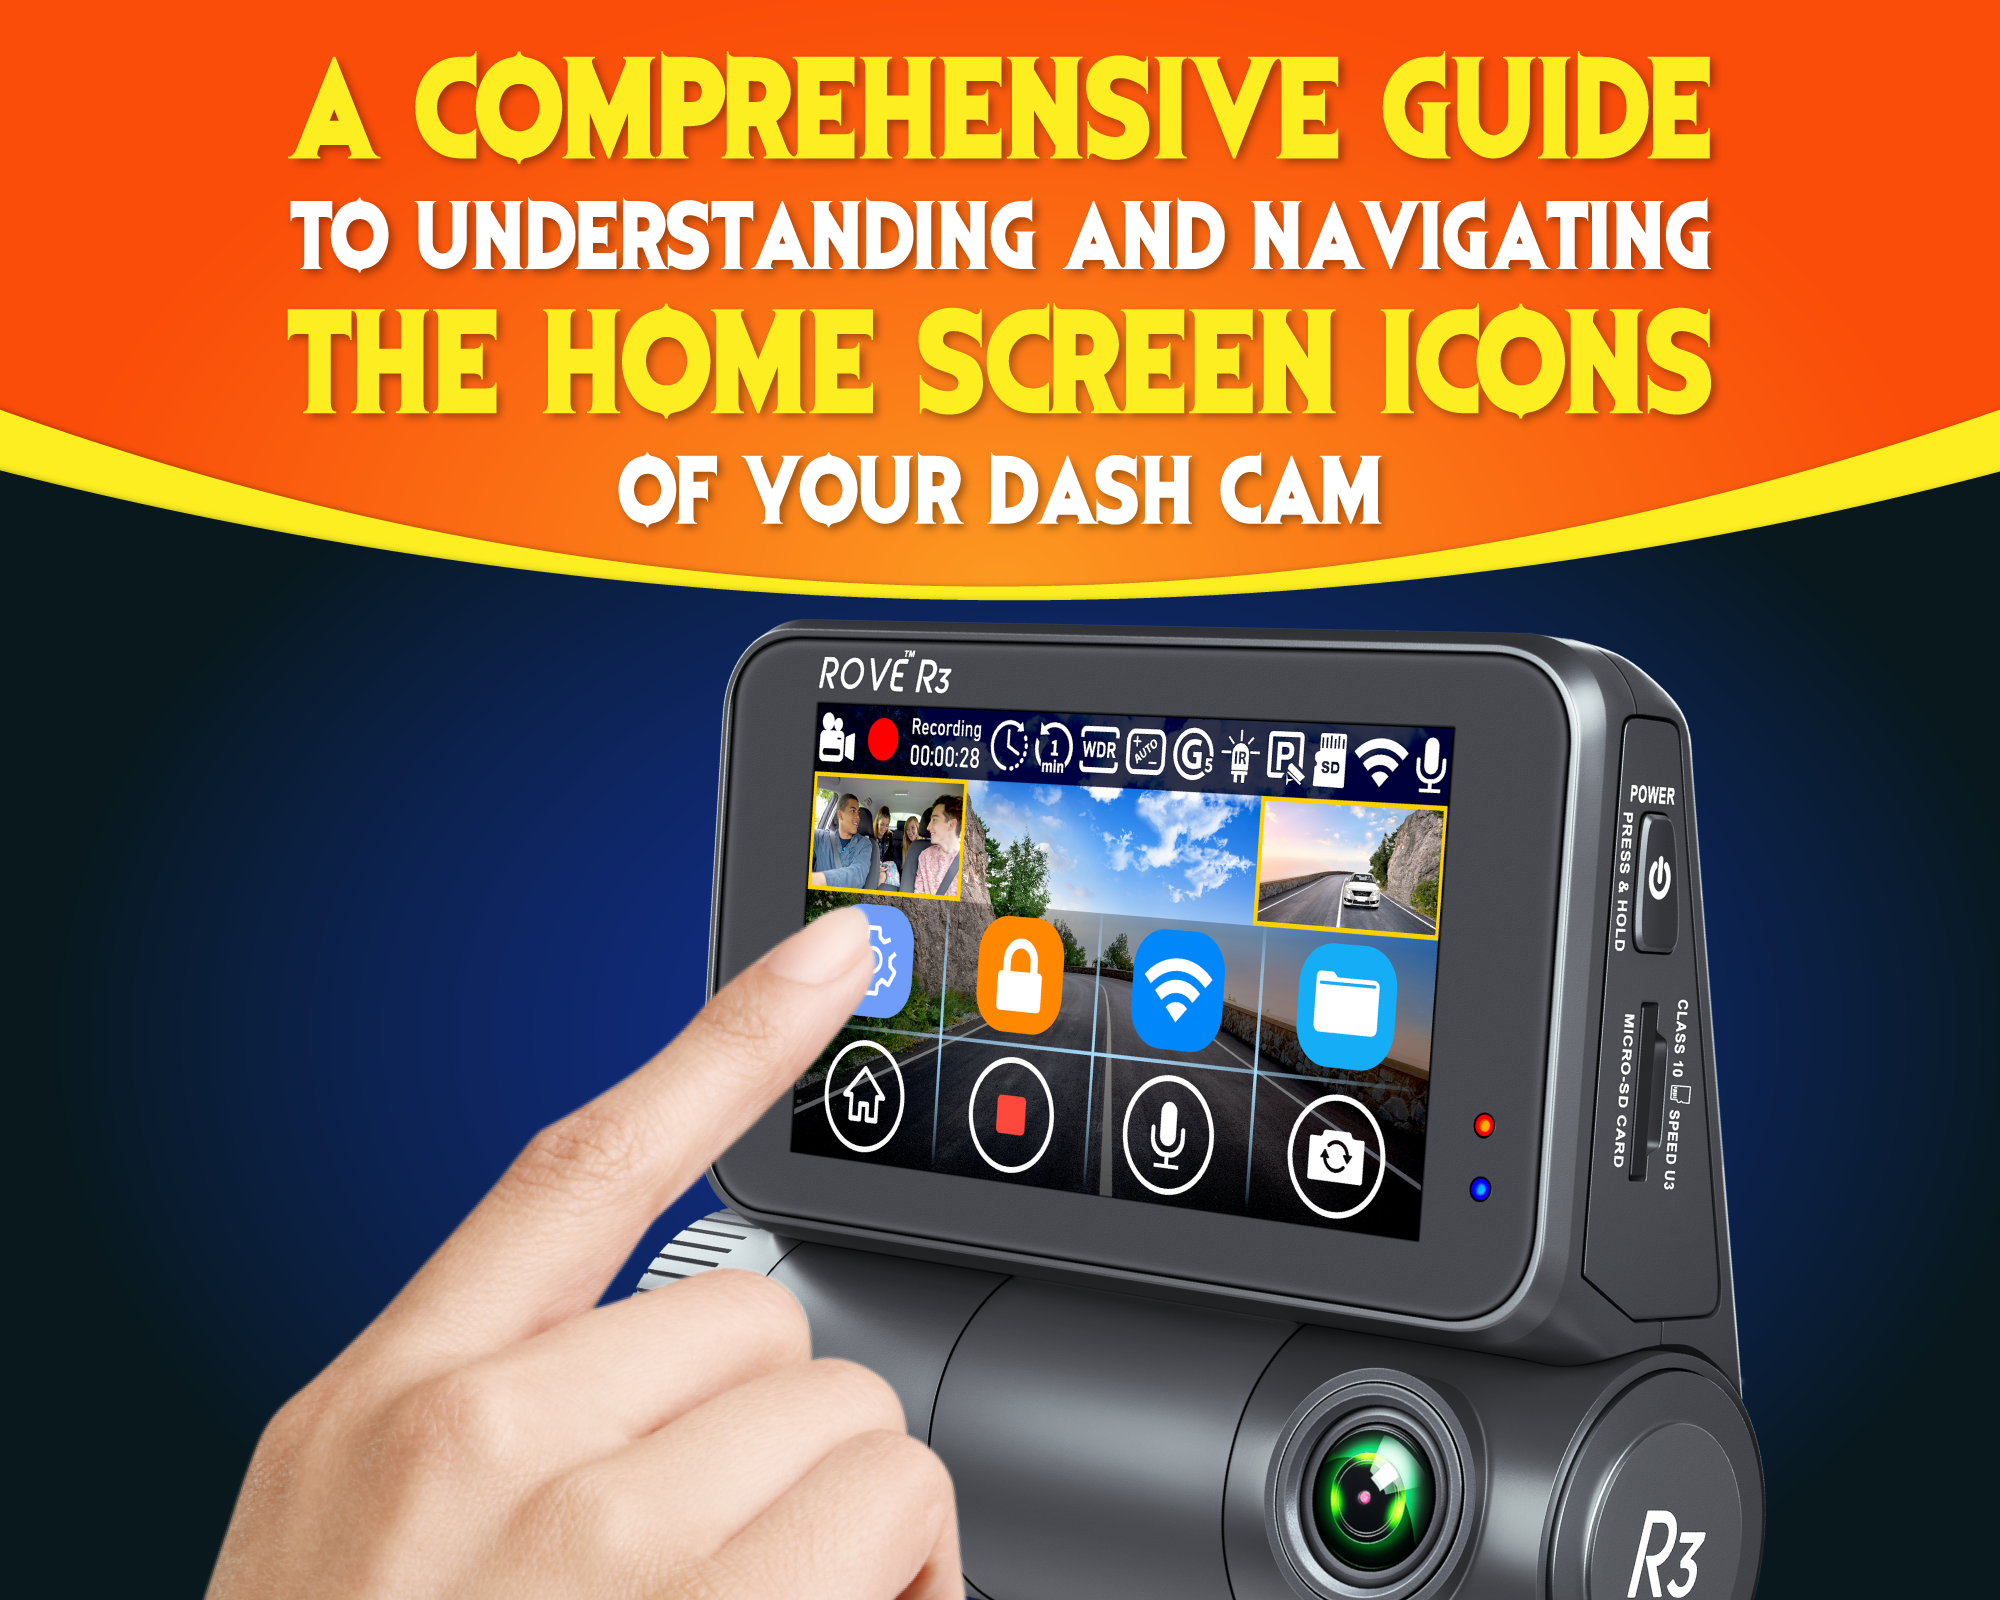 Guide to dash cams